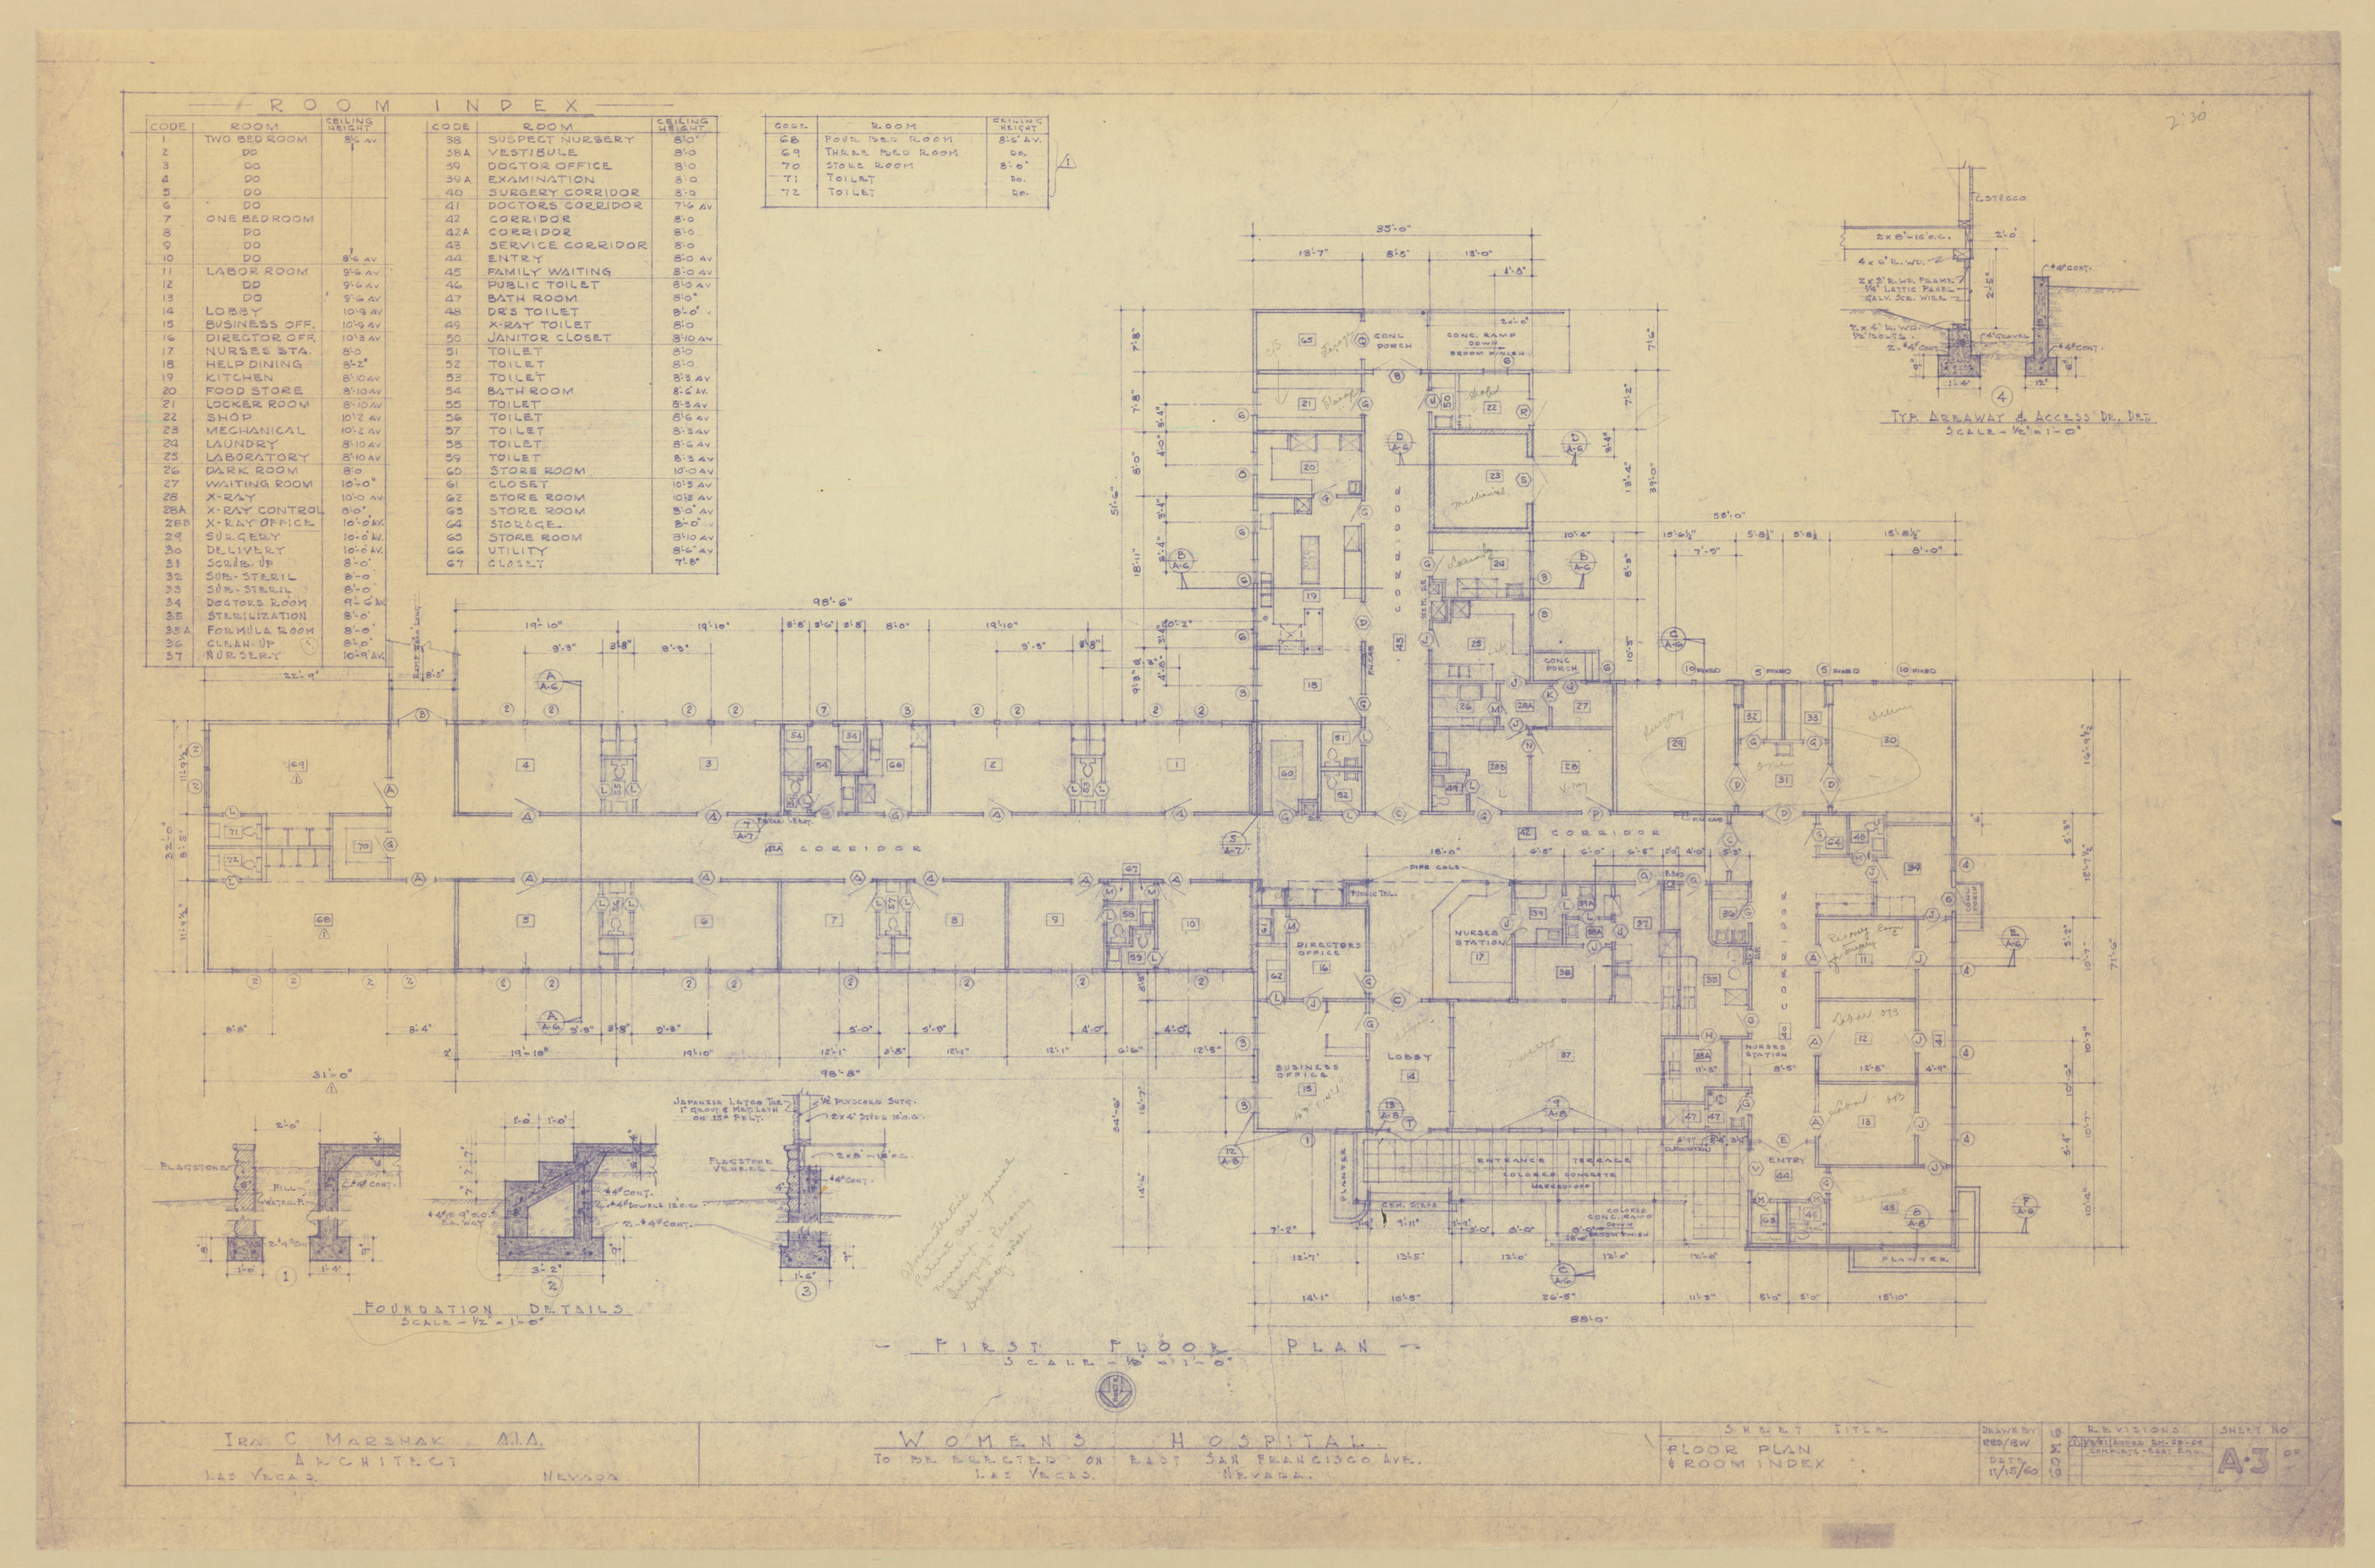 Women's Hospital: architectural, mechanical, electrical, plumbing drawings, image 002